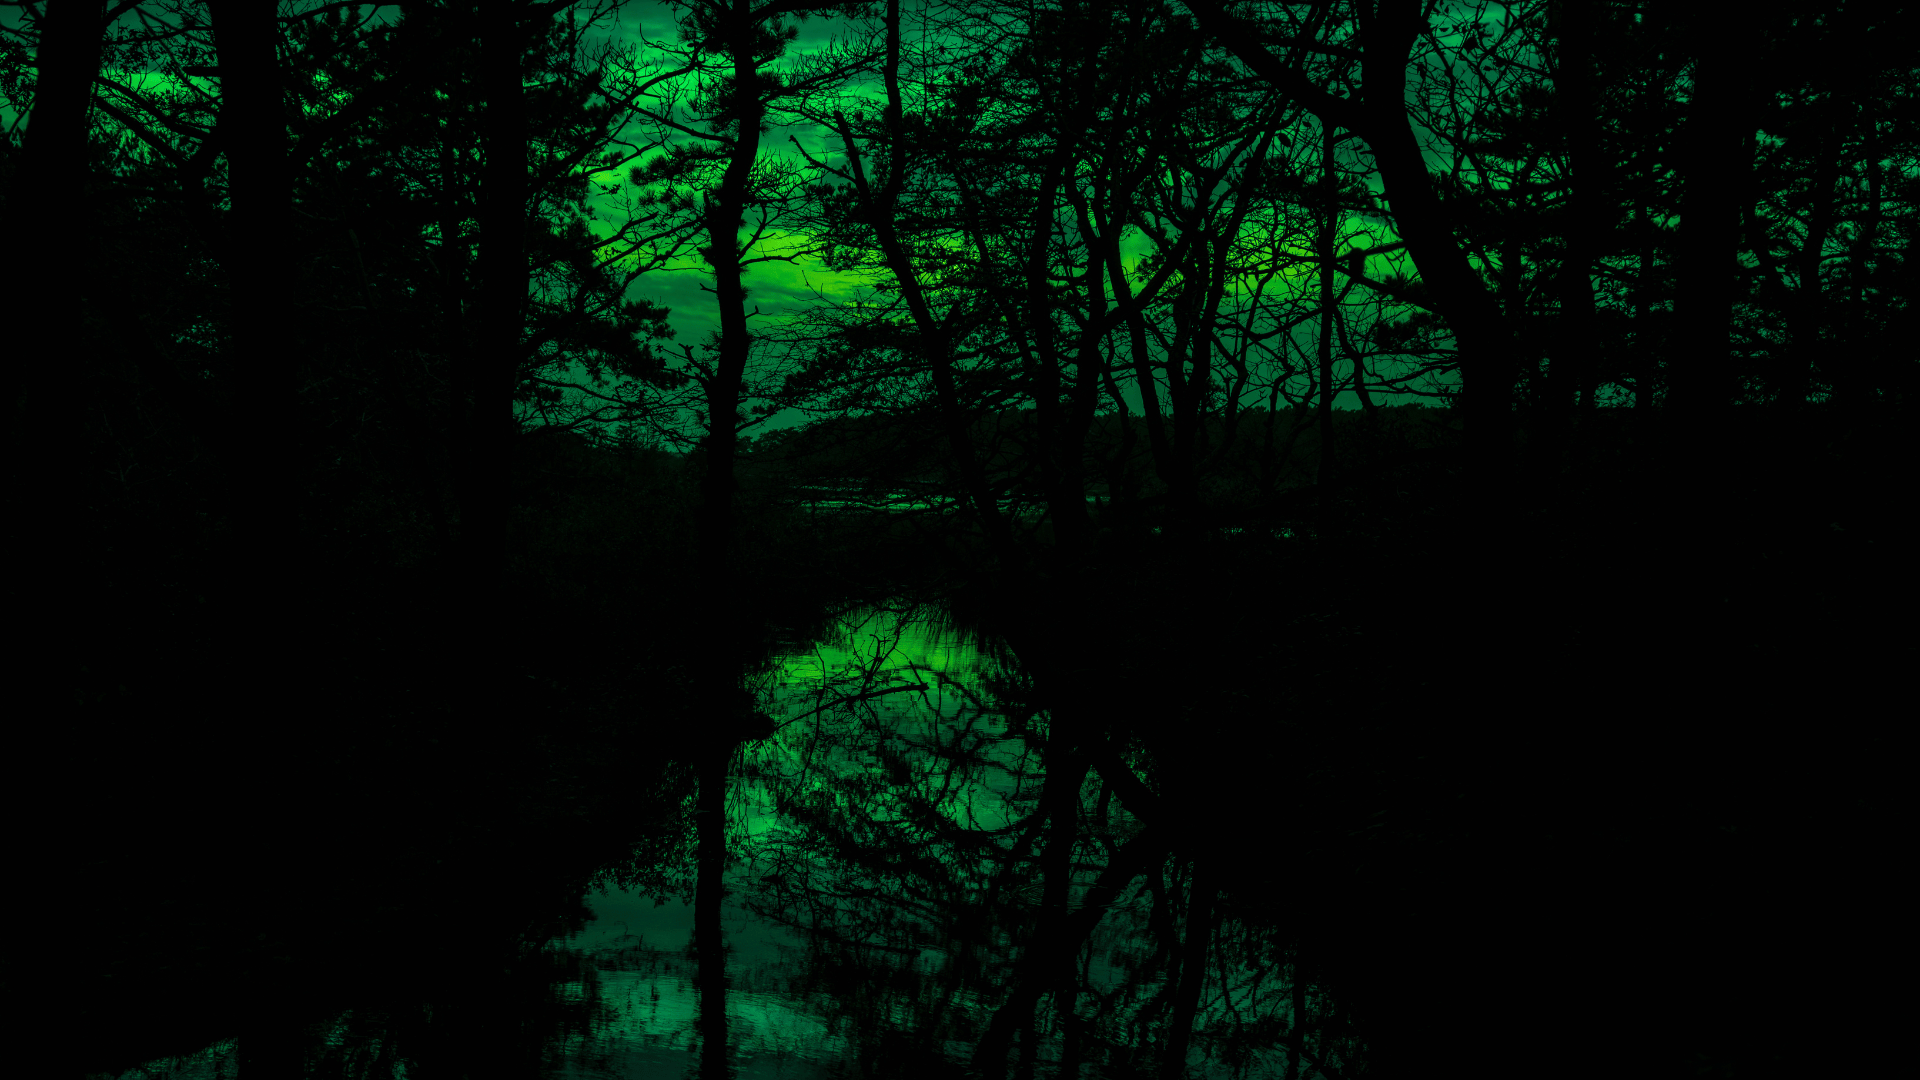 night vision view of pond